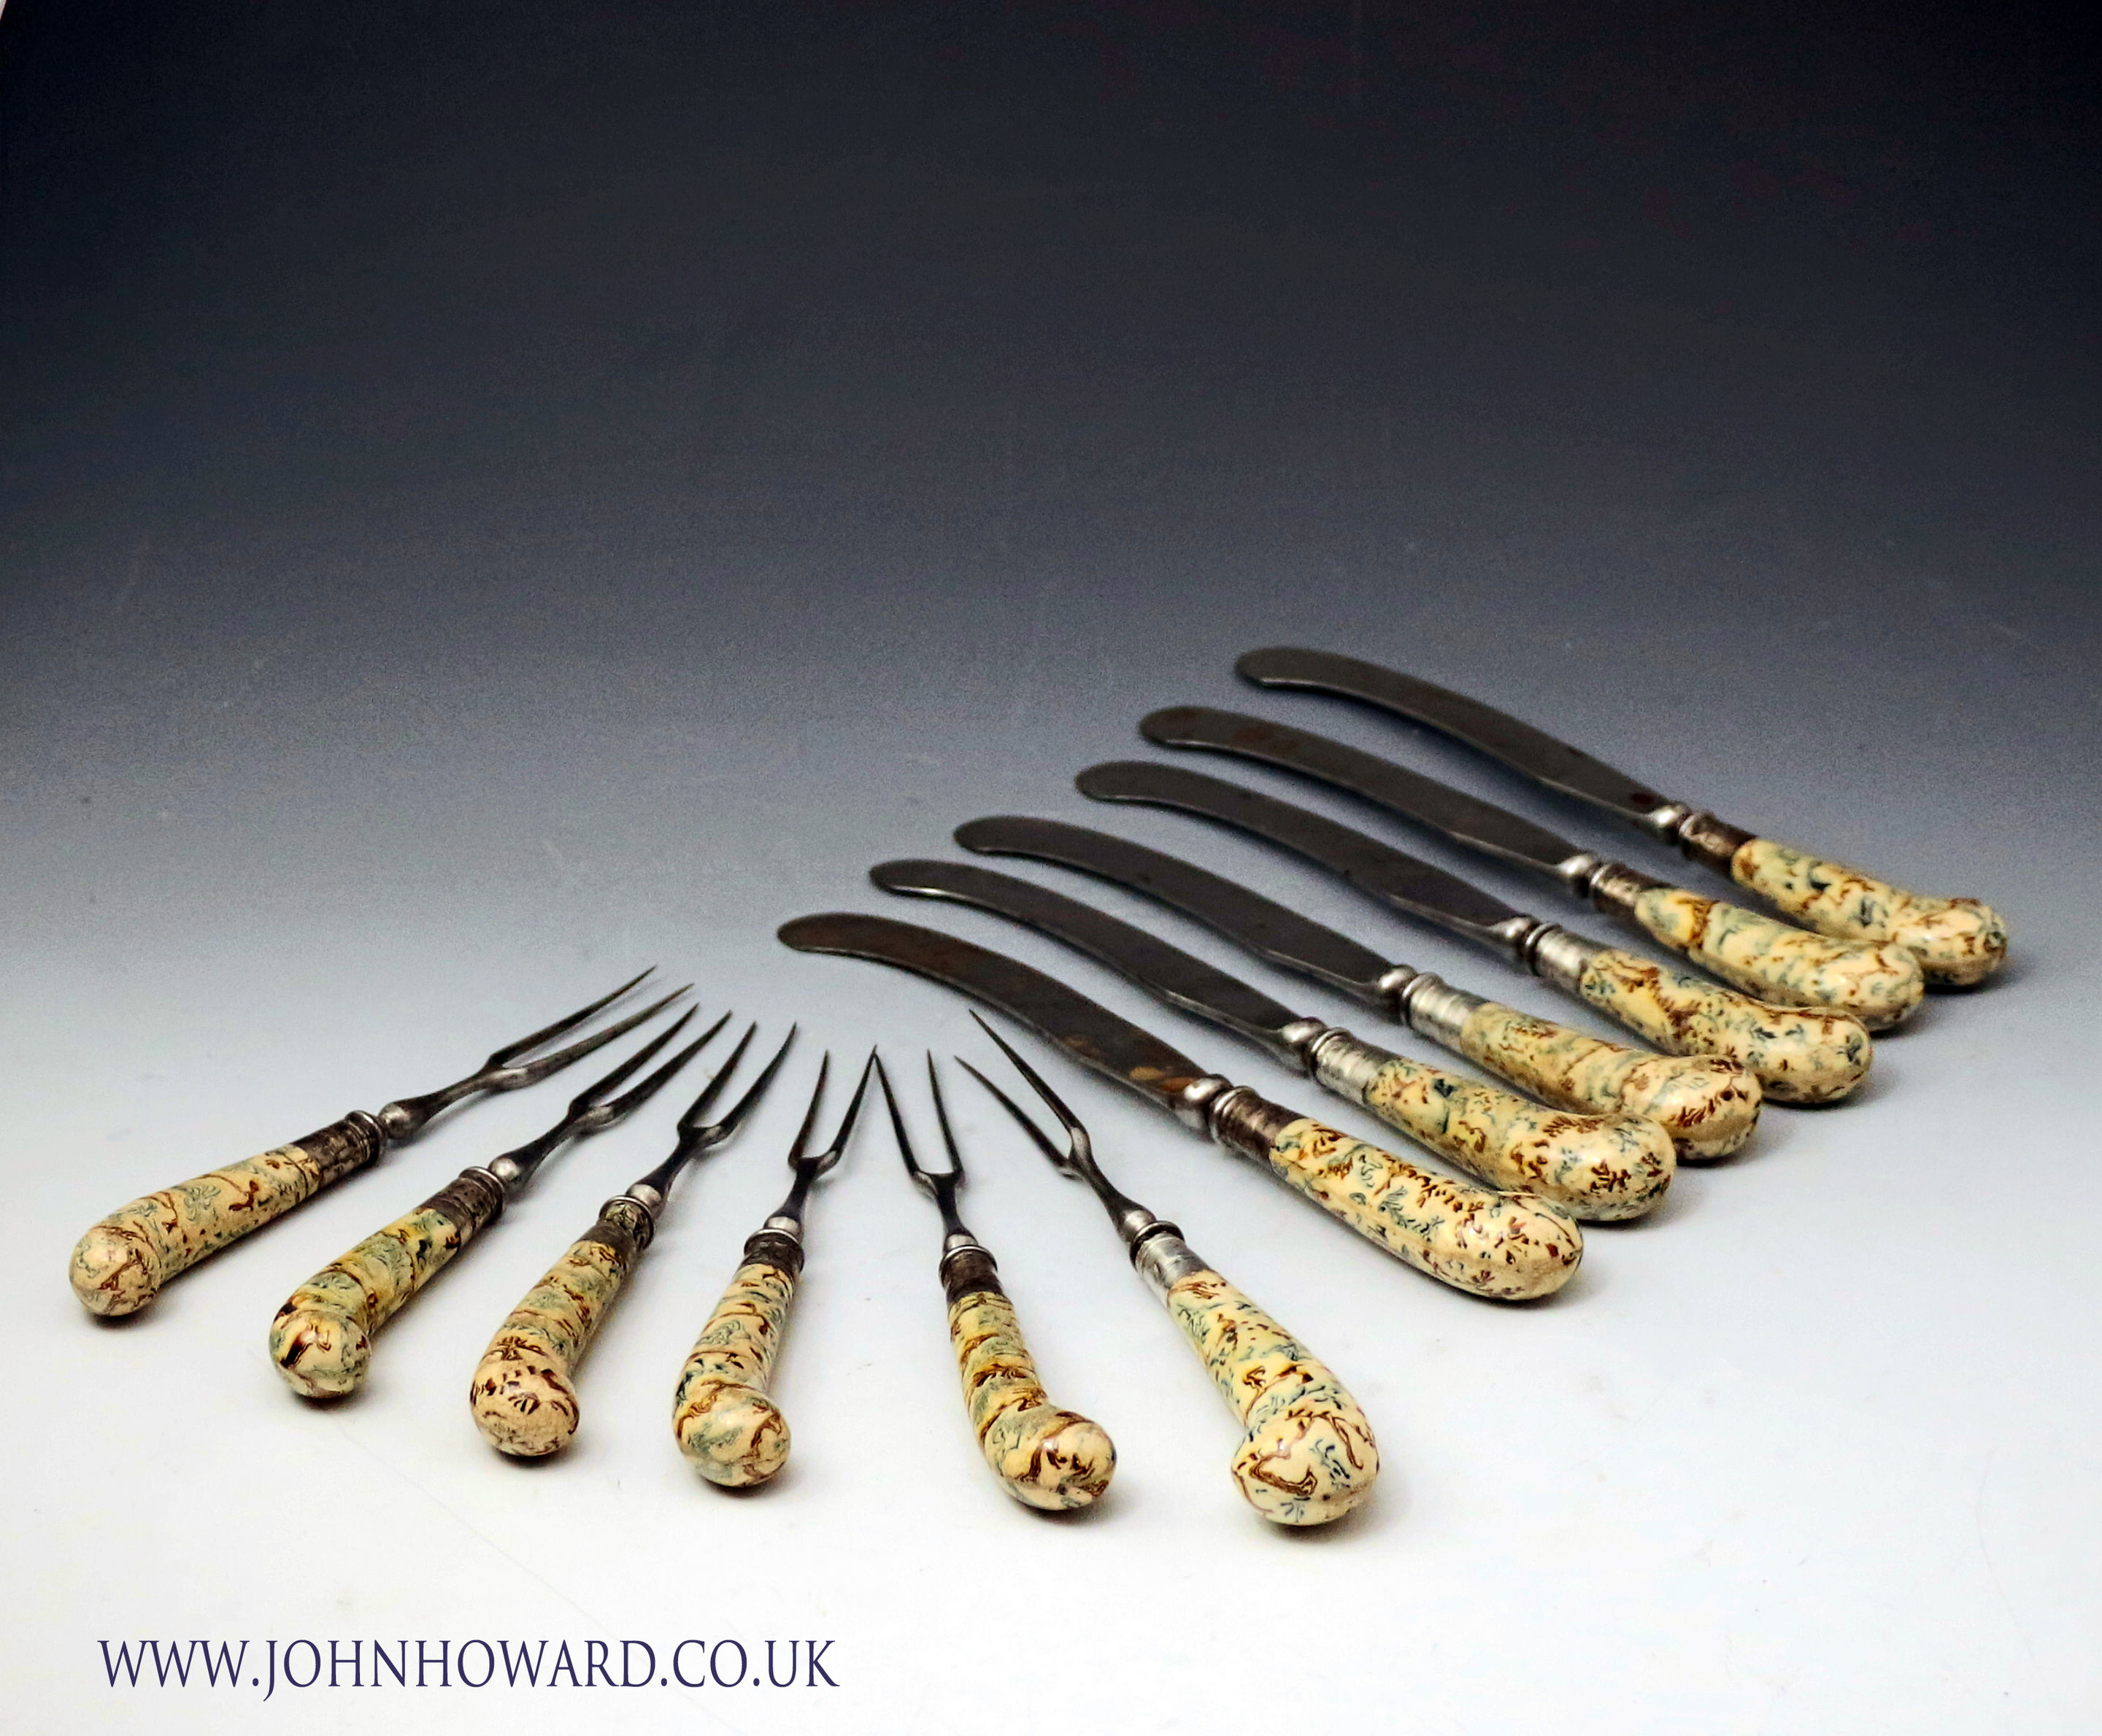 Whieldon type pottery knives and forks in agateware mid 18th century England